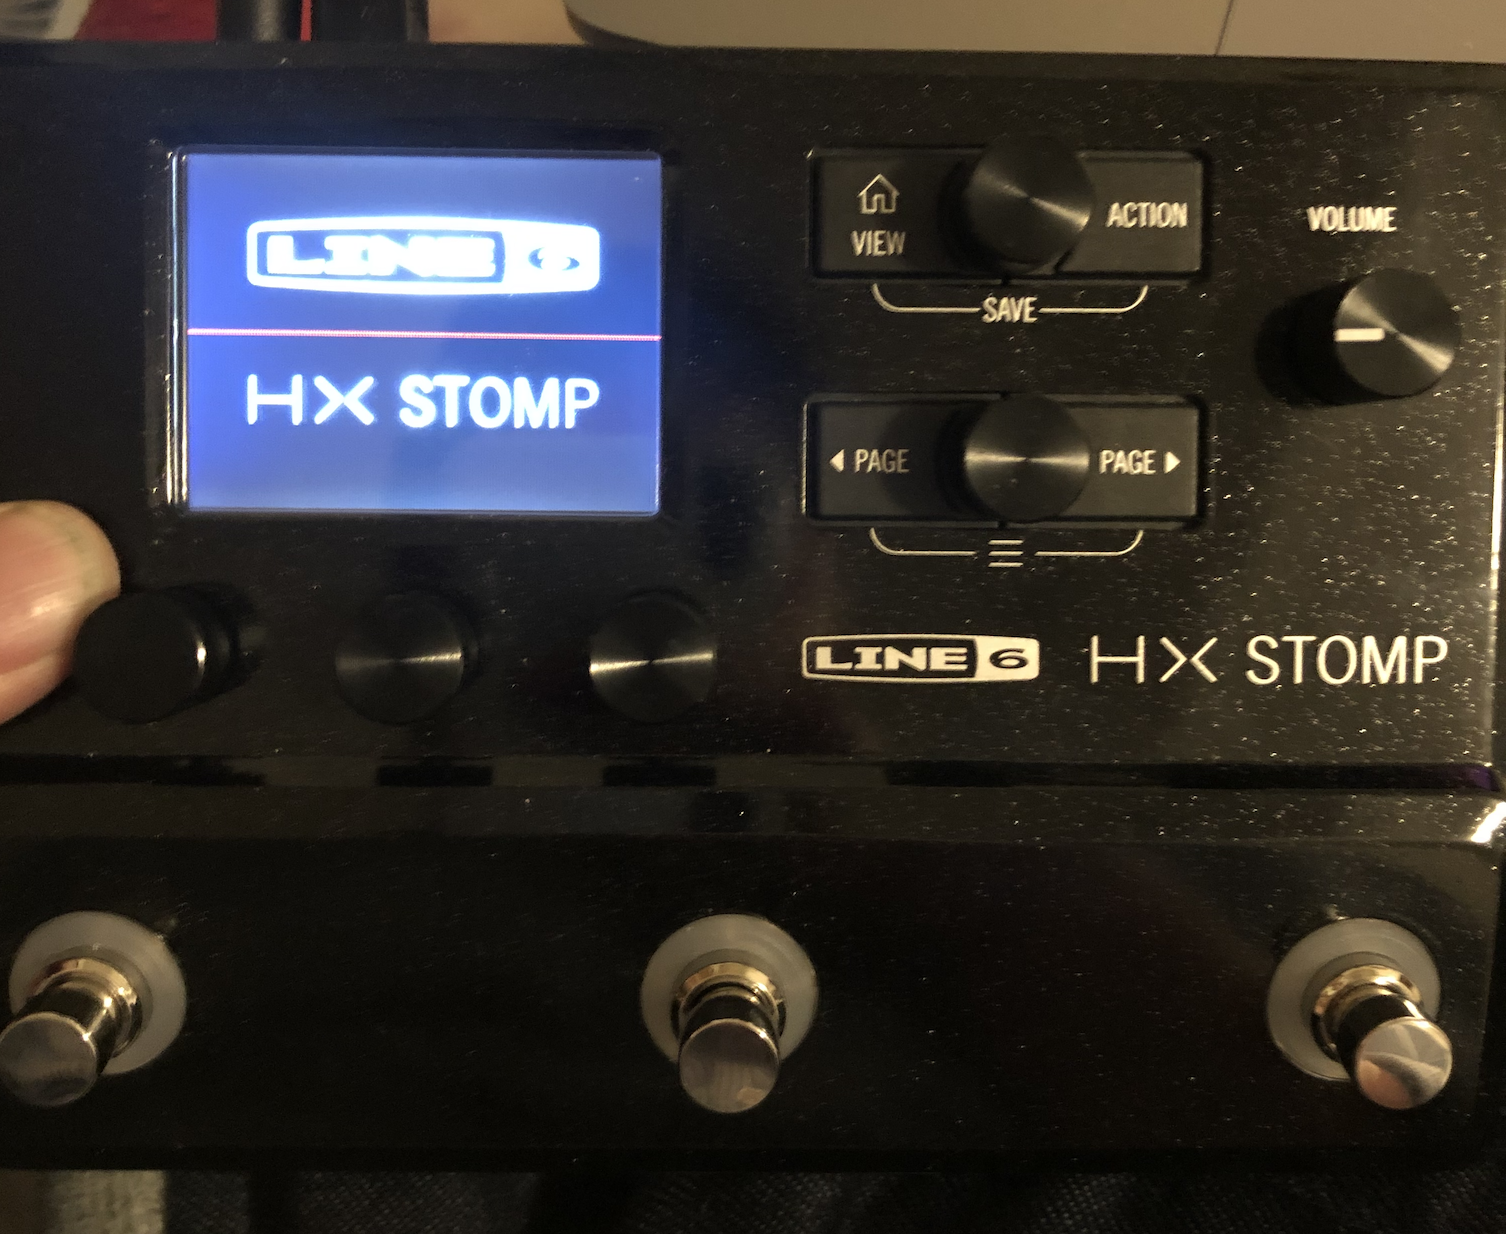 HX stomp won't boot after failed update - Helix - Line 6 Community